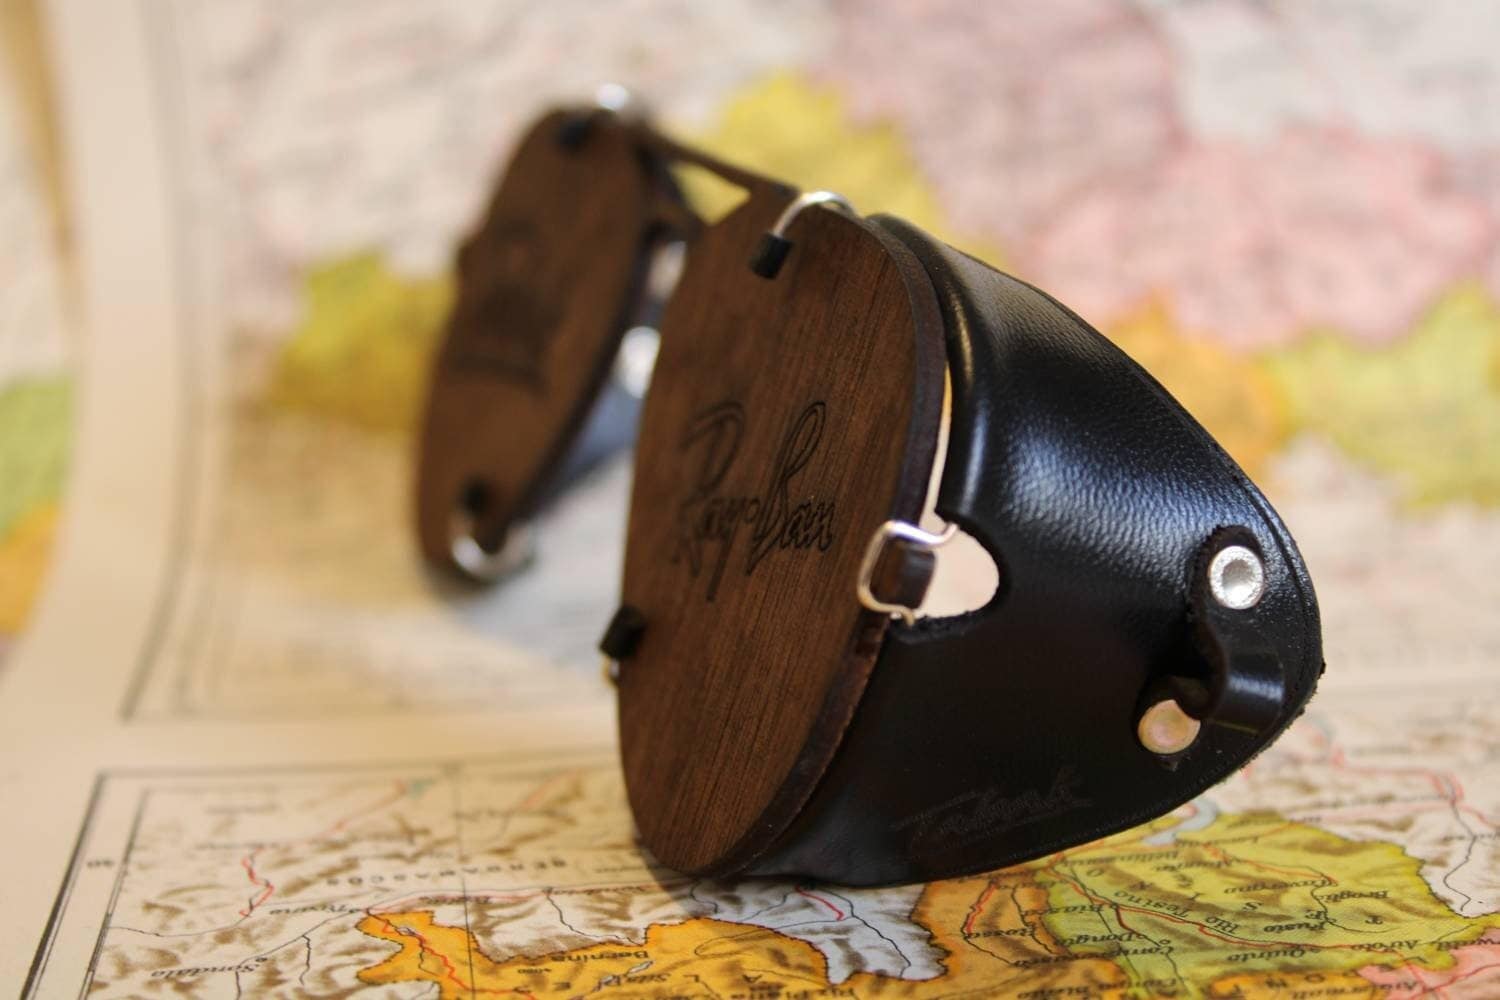 Side Shields for Ray-ban Aviator - Etsy